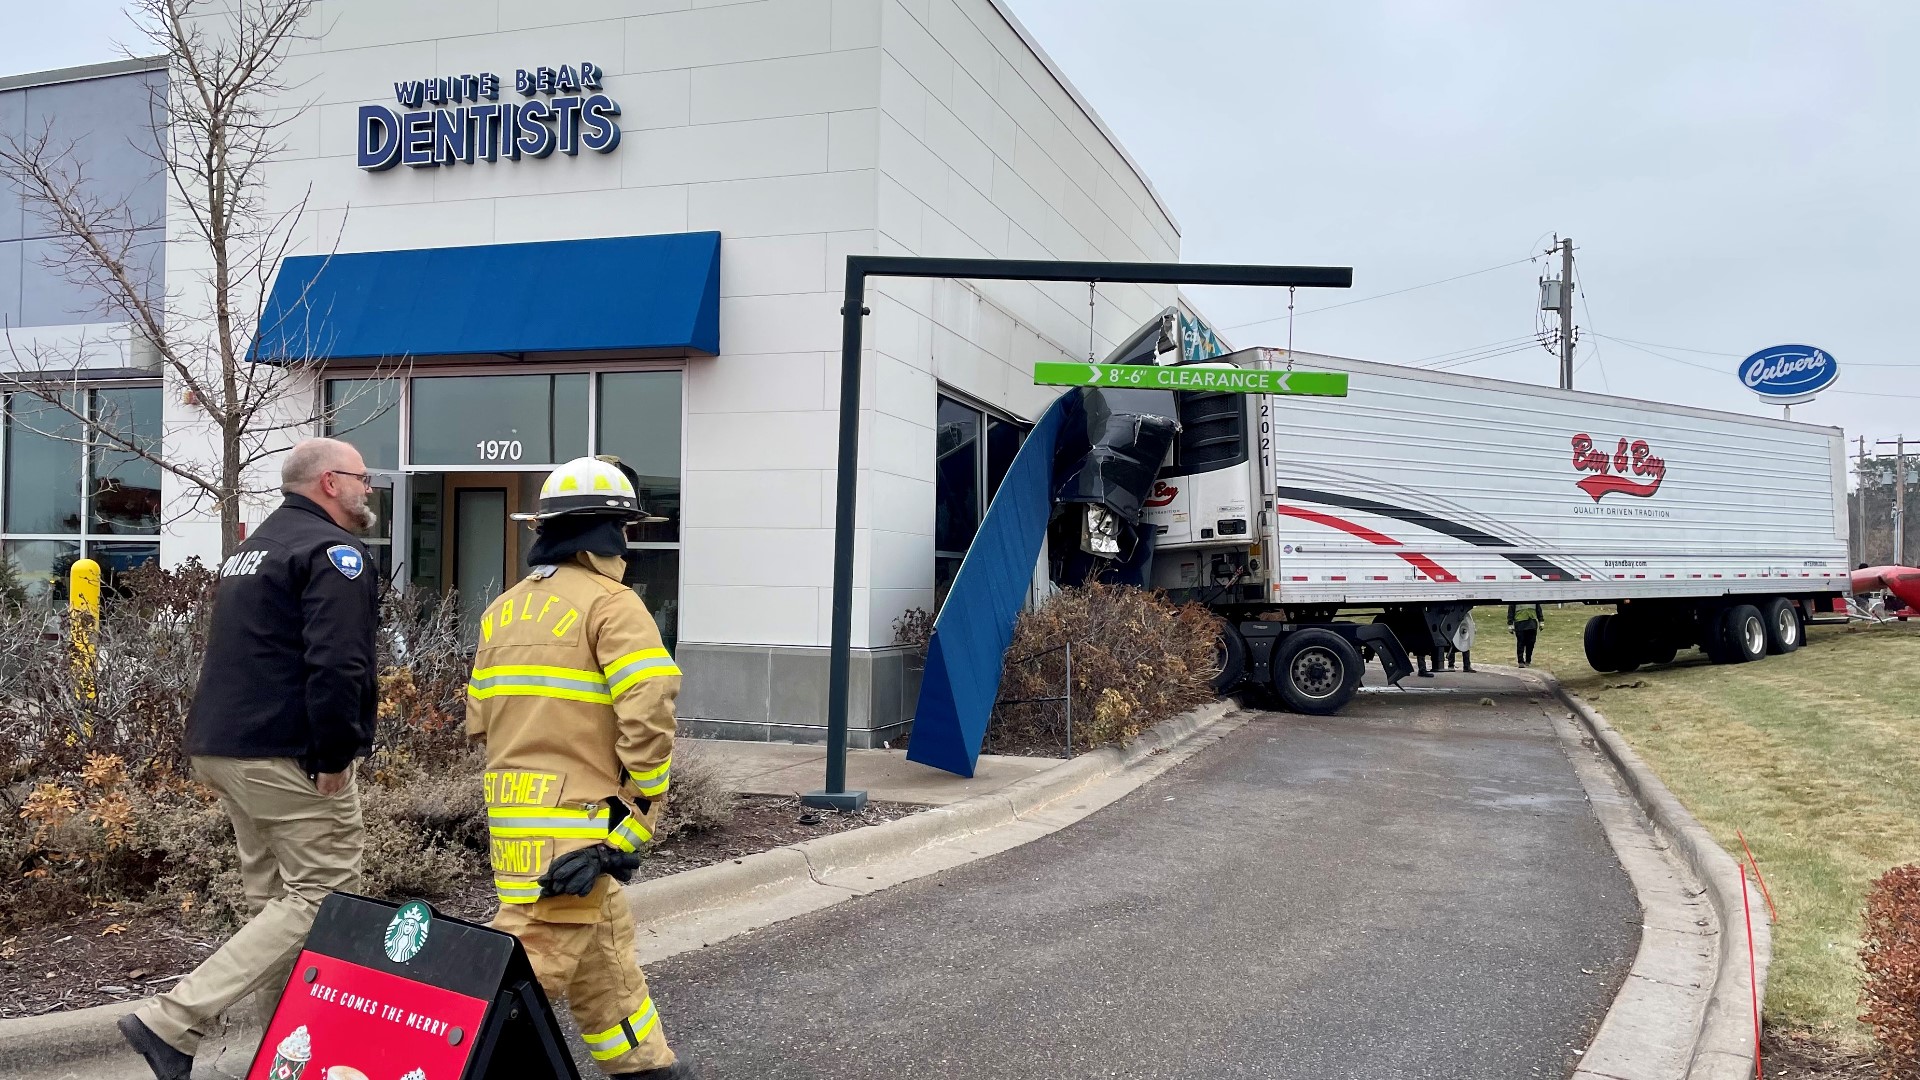 Two dentists and the semi driver were all transported to a nearby hospital with injuries officials are describing as "non-life threatening."